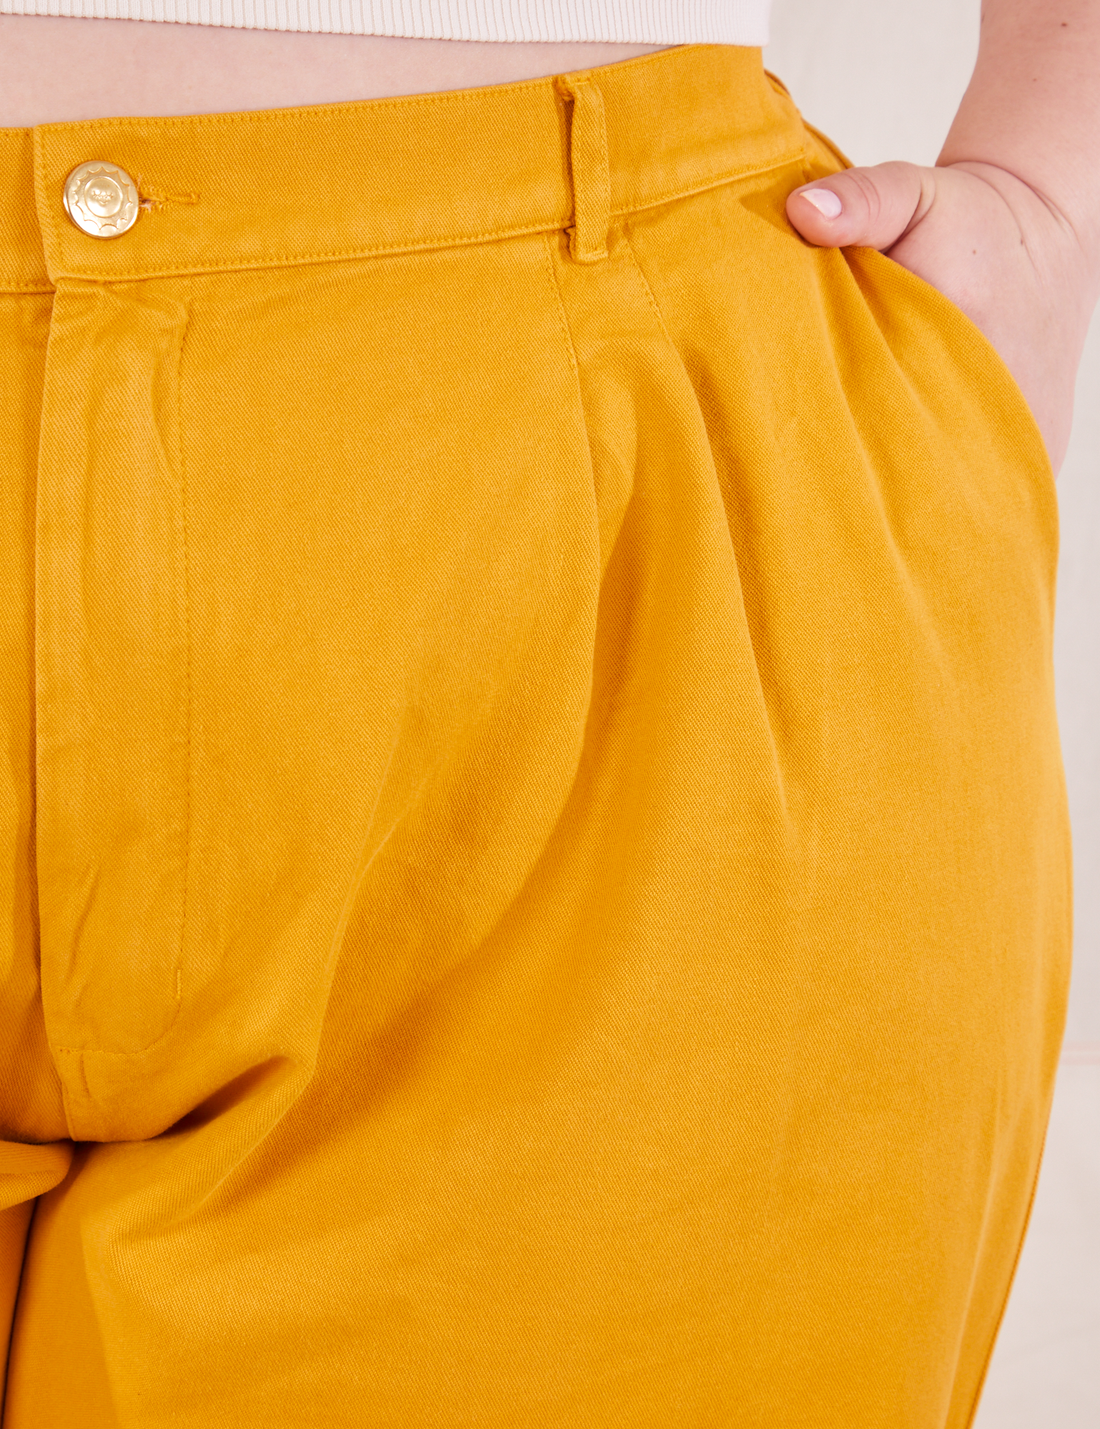 Front close up of Organic Trousers in Mustard Yellow. Ashley has her hand in the front pocket.